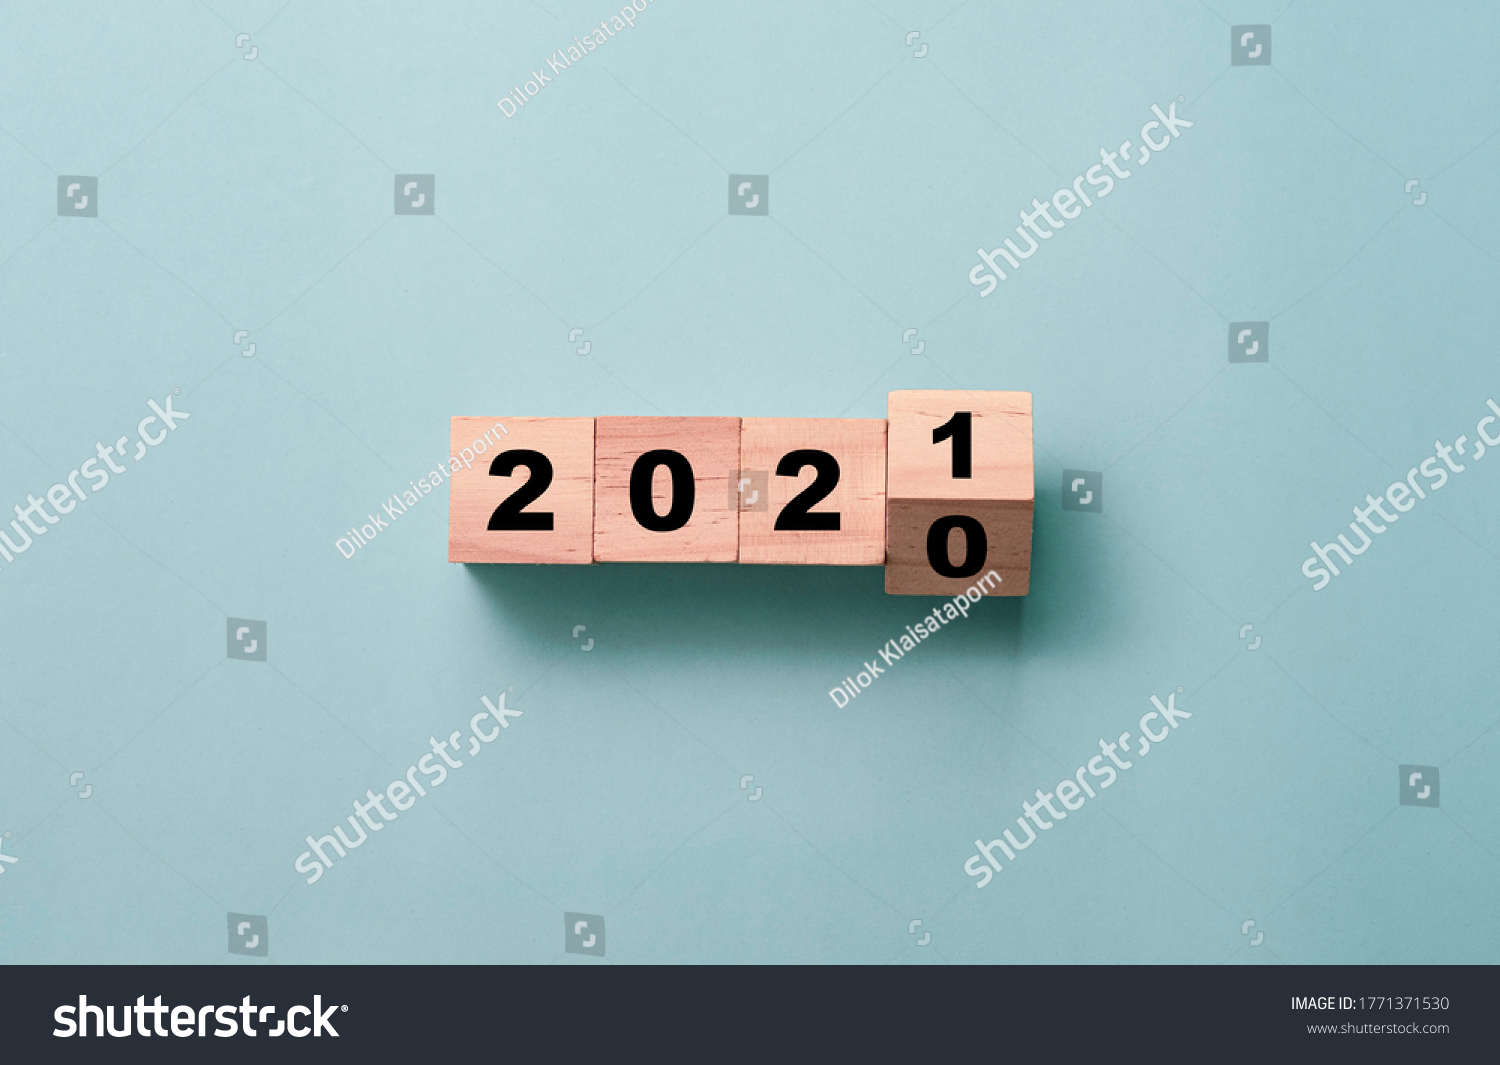 Flipping of wooden cubes block to change 2020 to 2021 year. Merry Christmas and happy new year concept. #1771371530